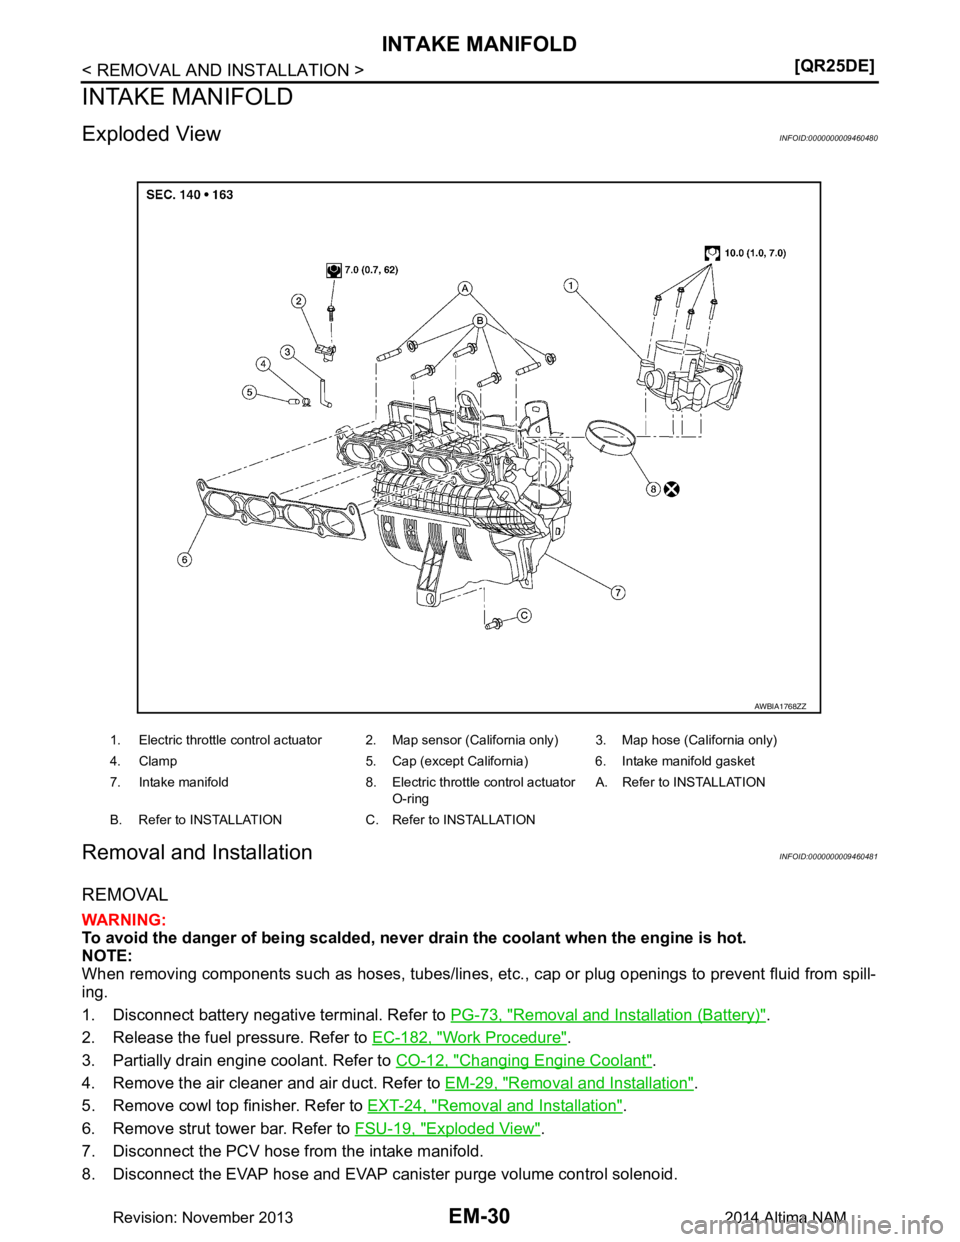 NISSAN TEANA 2014  Service Manual 
EM-30
< REMOVAL AND INSTALLATION >[QR25DE]
INTAKE MANIFOLD
INTAKE MANIFOLD
Exploded ViewINFOID:0000000009460480
Removal and InstallationINFOID:0000000009460481
REMOVAL
WARNING: 
To avoid the danger o